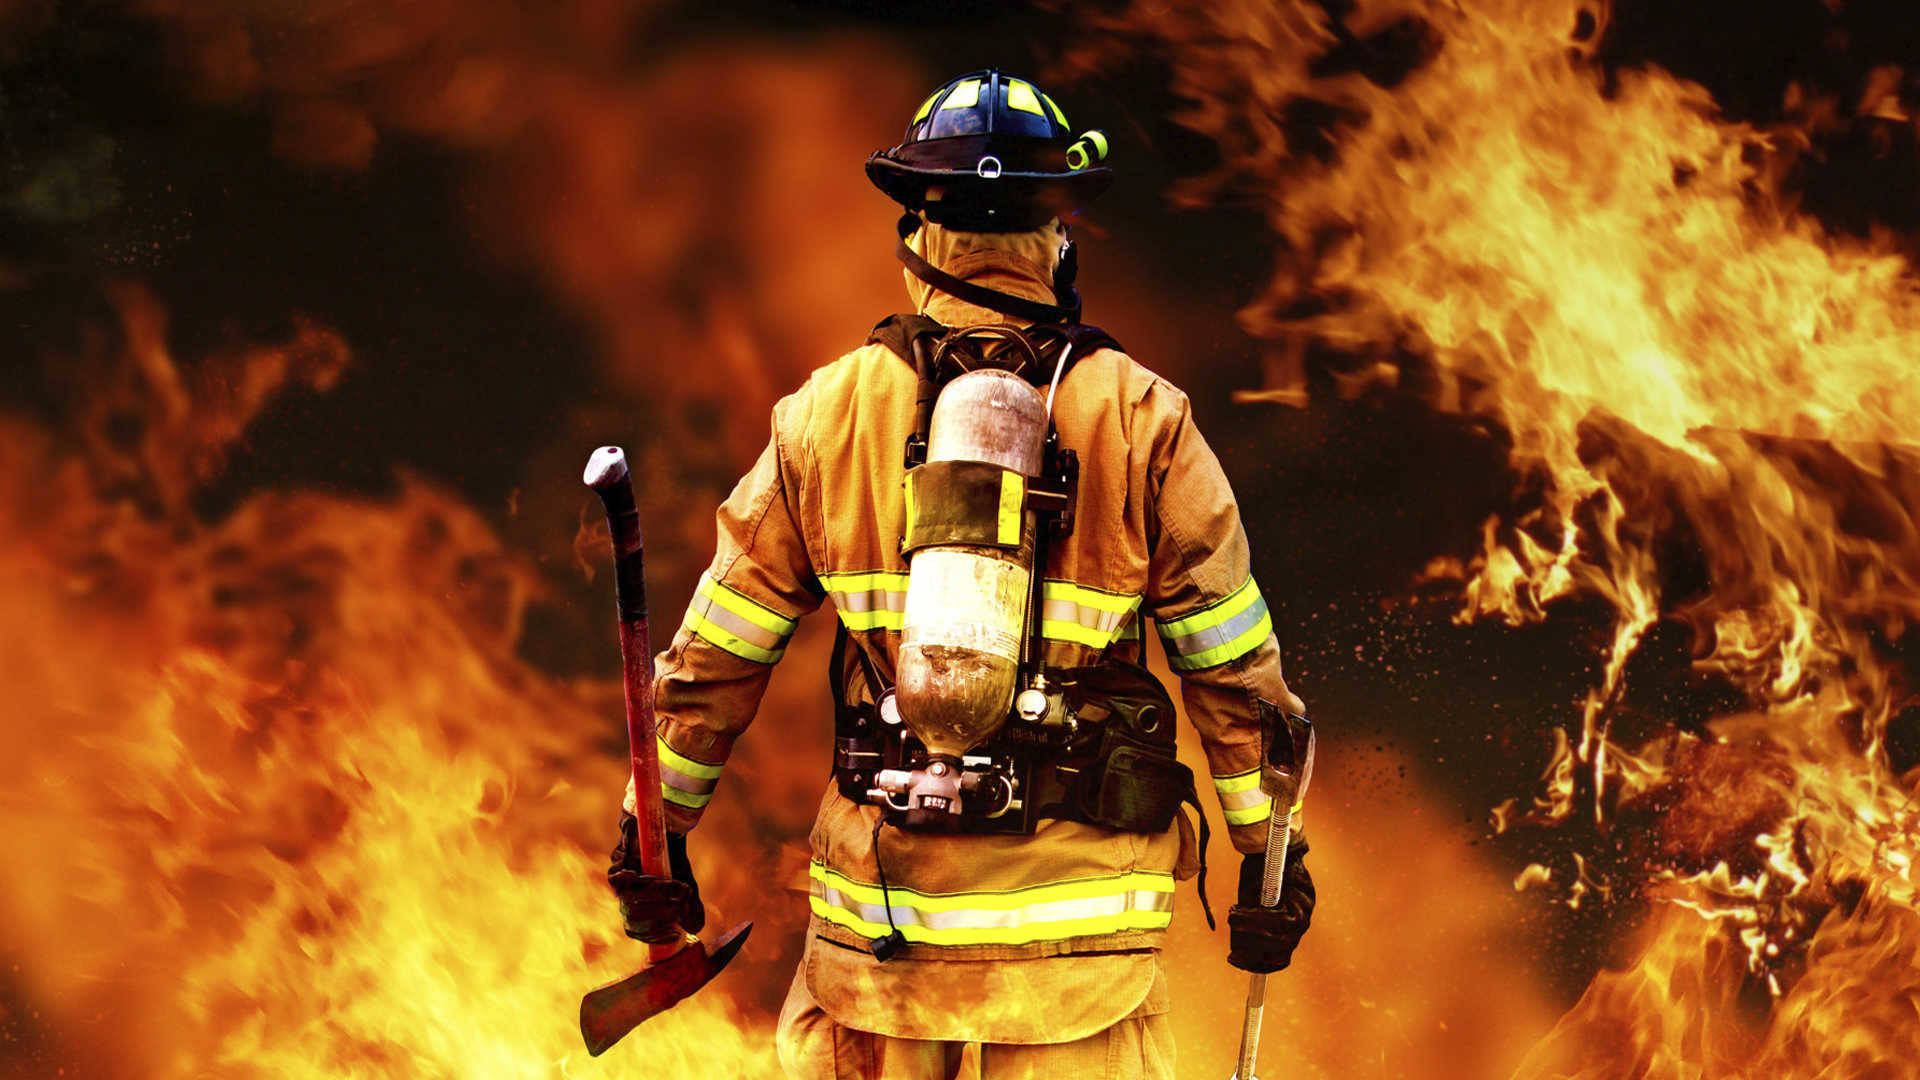 Free Firefighter Wallpaper Downloads, [200+] Firefighter Wallpapers for  FREE 